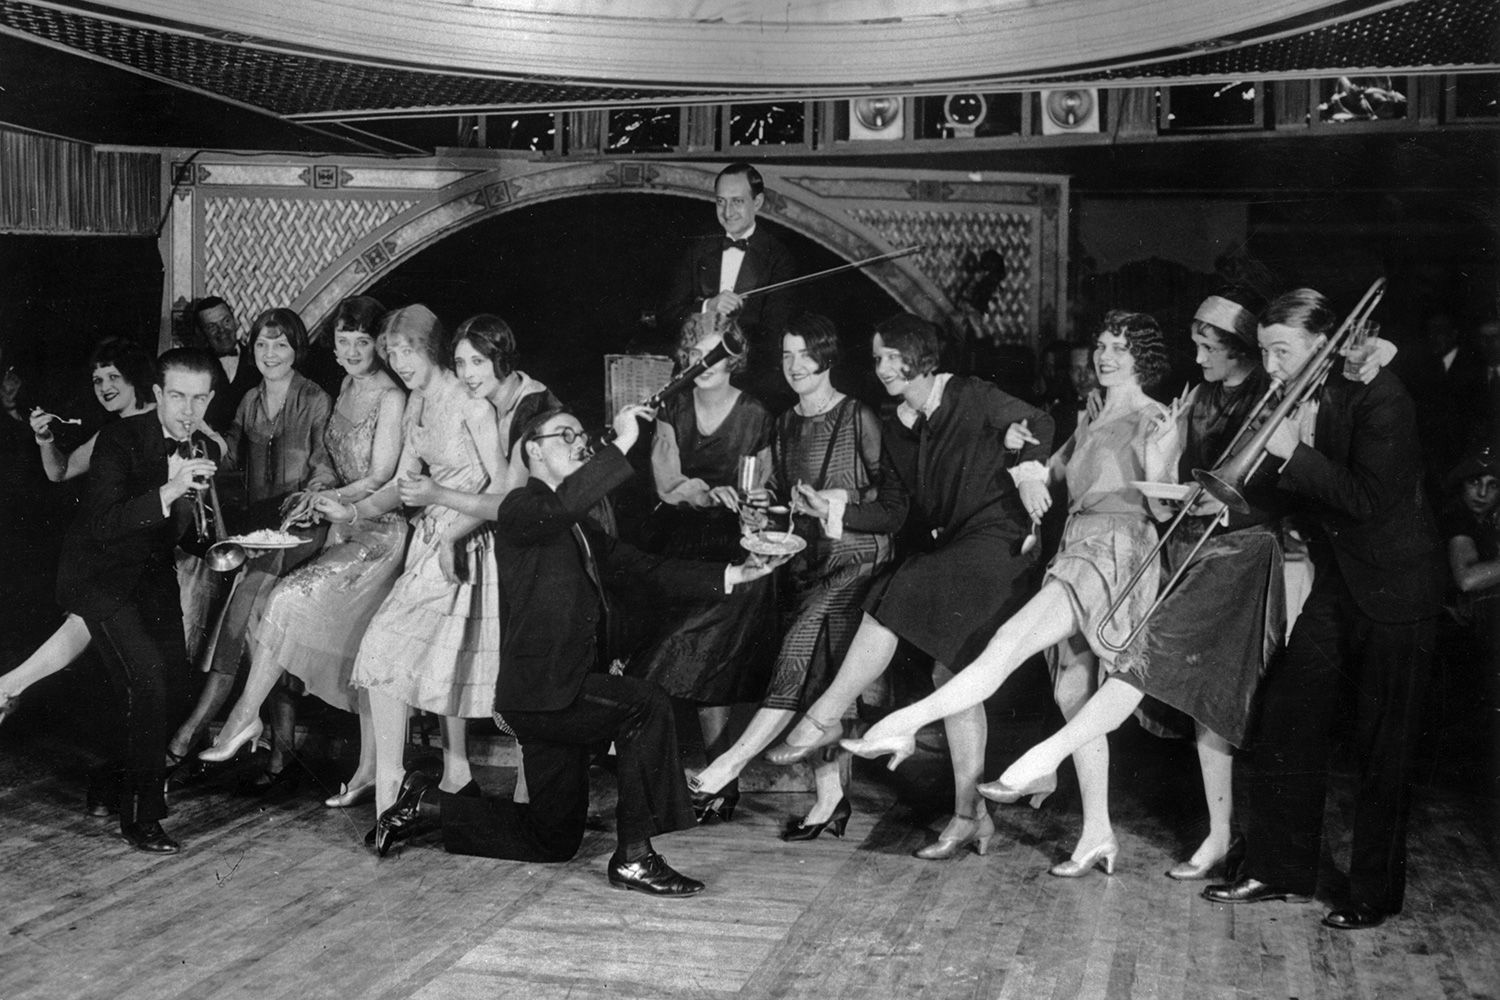 “Get a Wiggle On” – Here's a List of Top 10 Slang Words of the 1920s